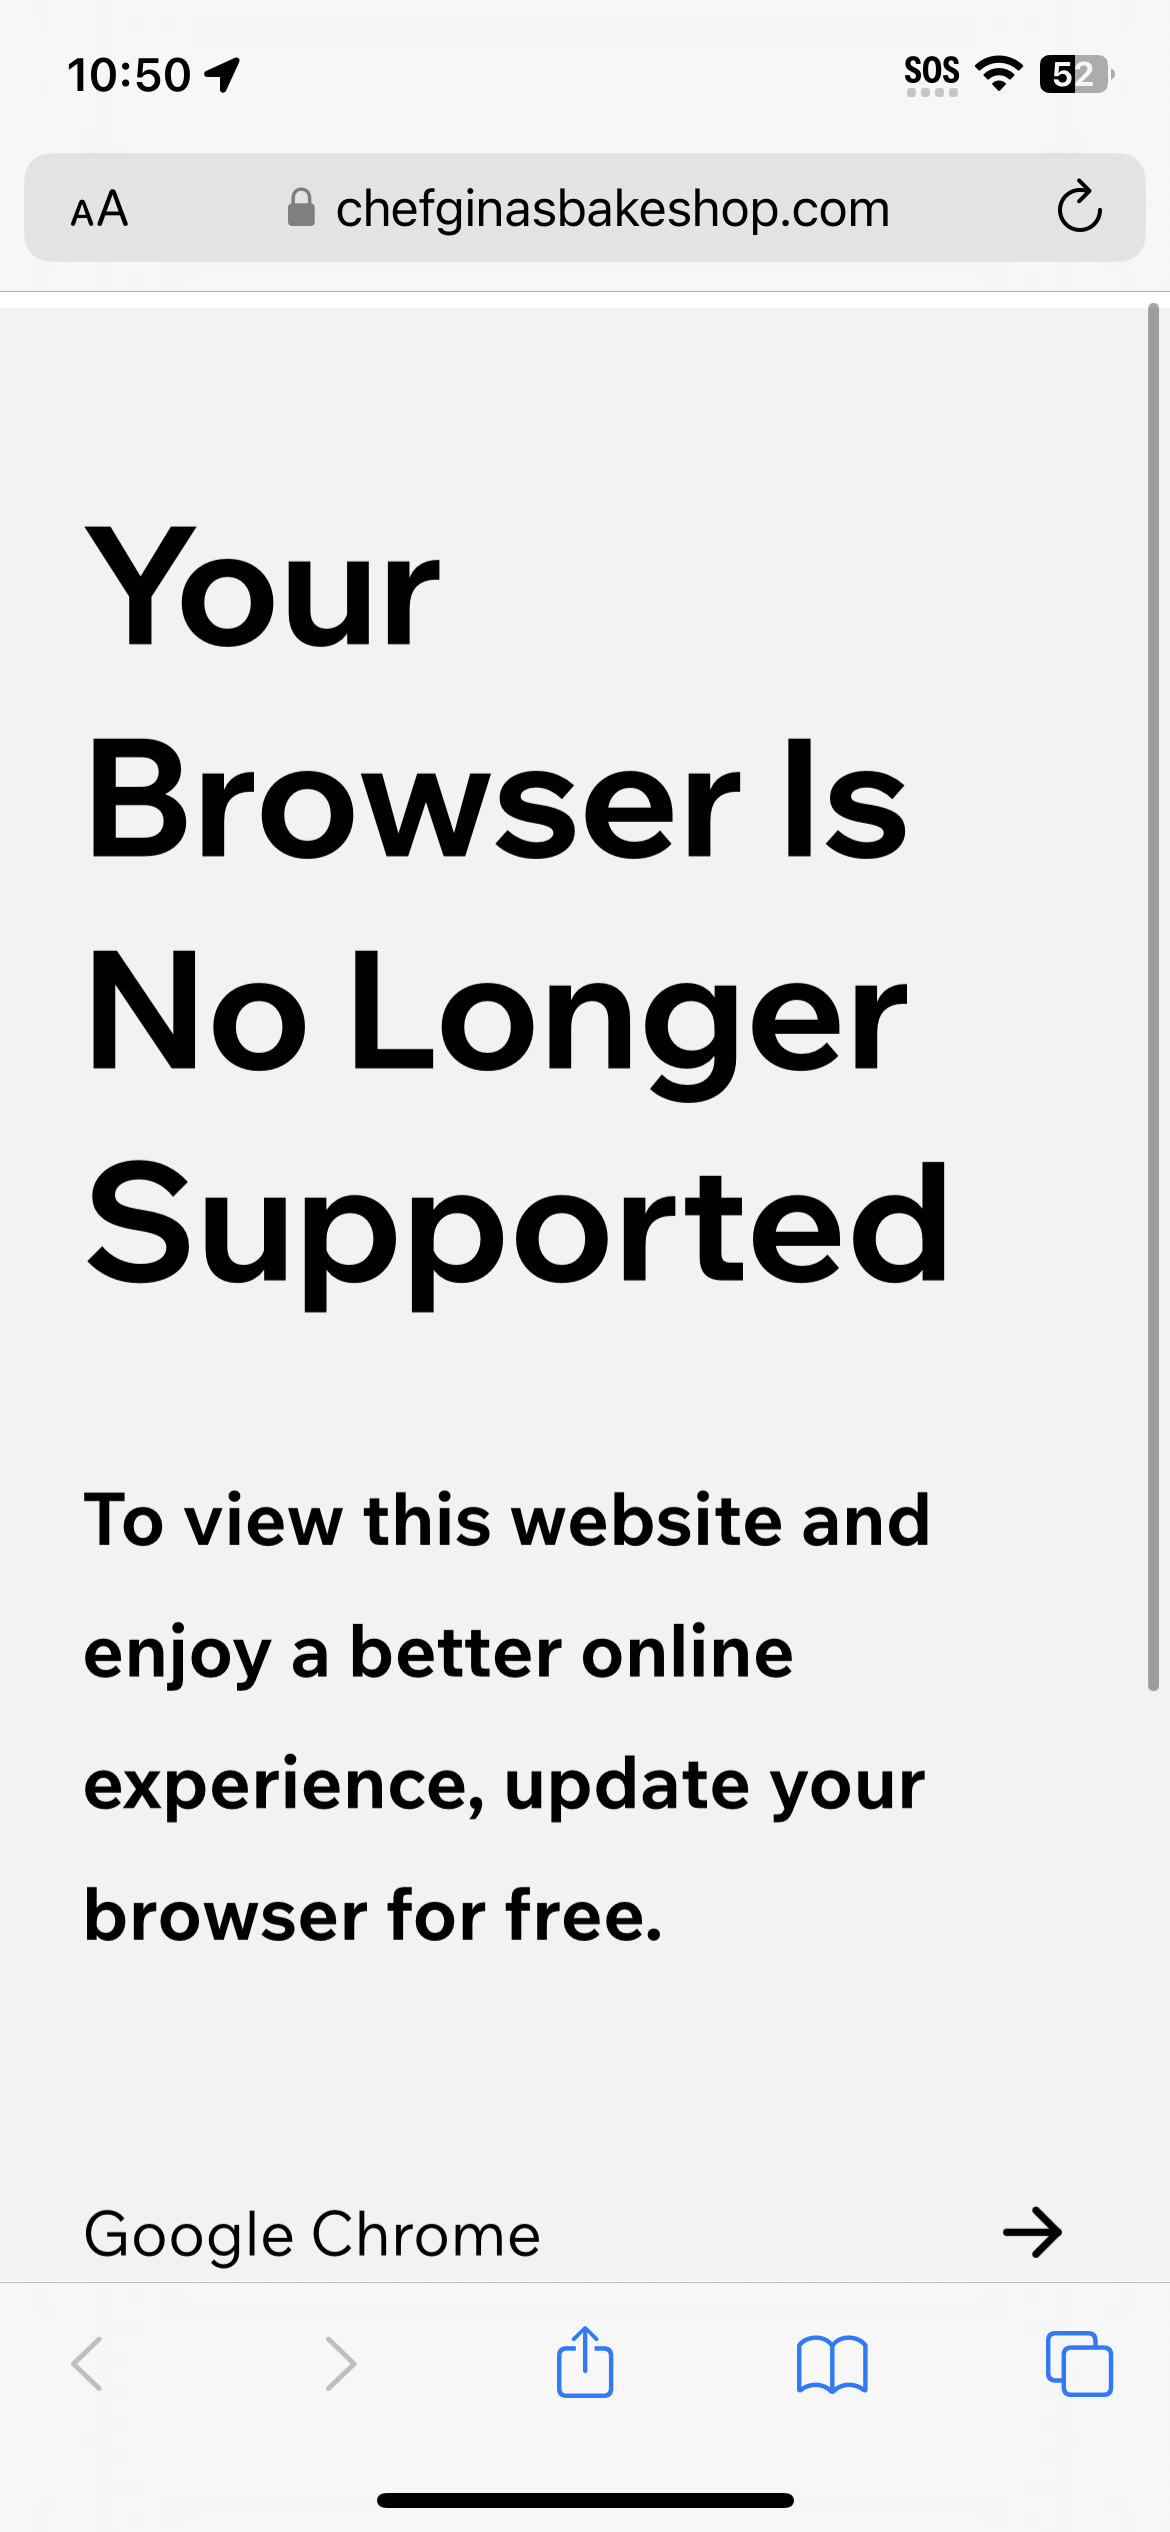 Continue in browser” no longer present on the website for mobile